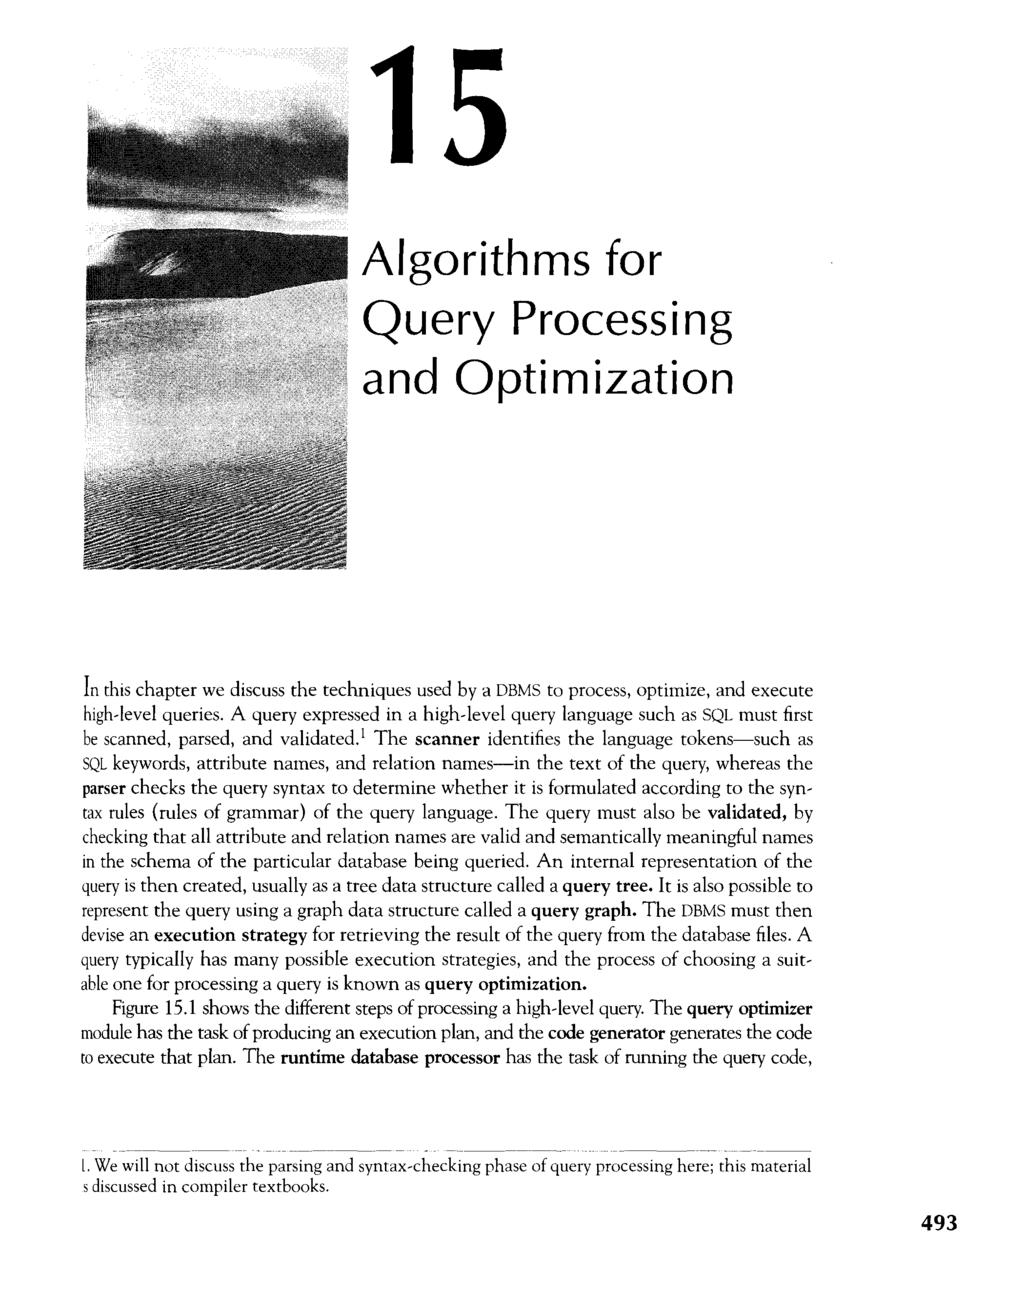 Algorithms for Query Processing and Optimization In this chapter we discuss the techniques used by a DBMS to process, optimize, and execute high-level queries.